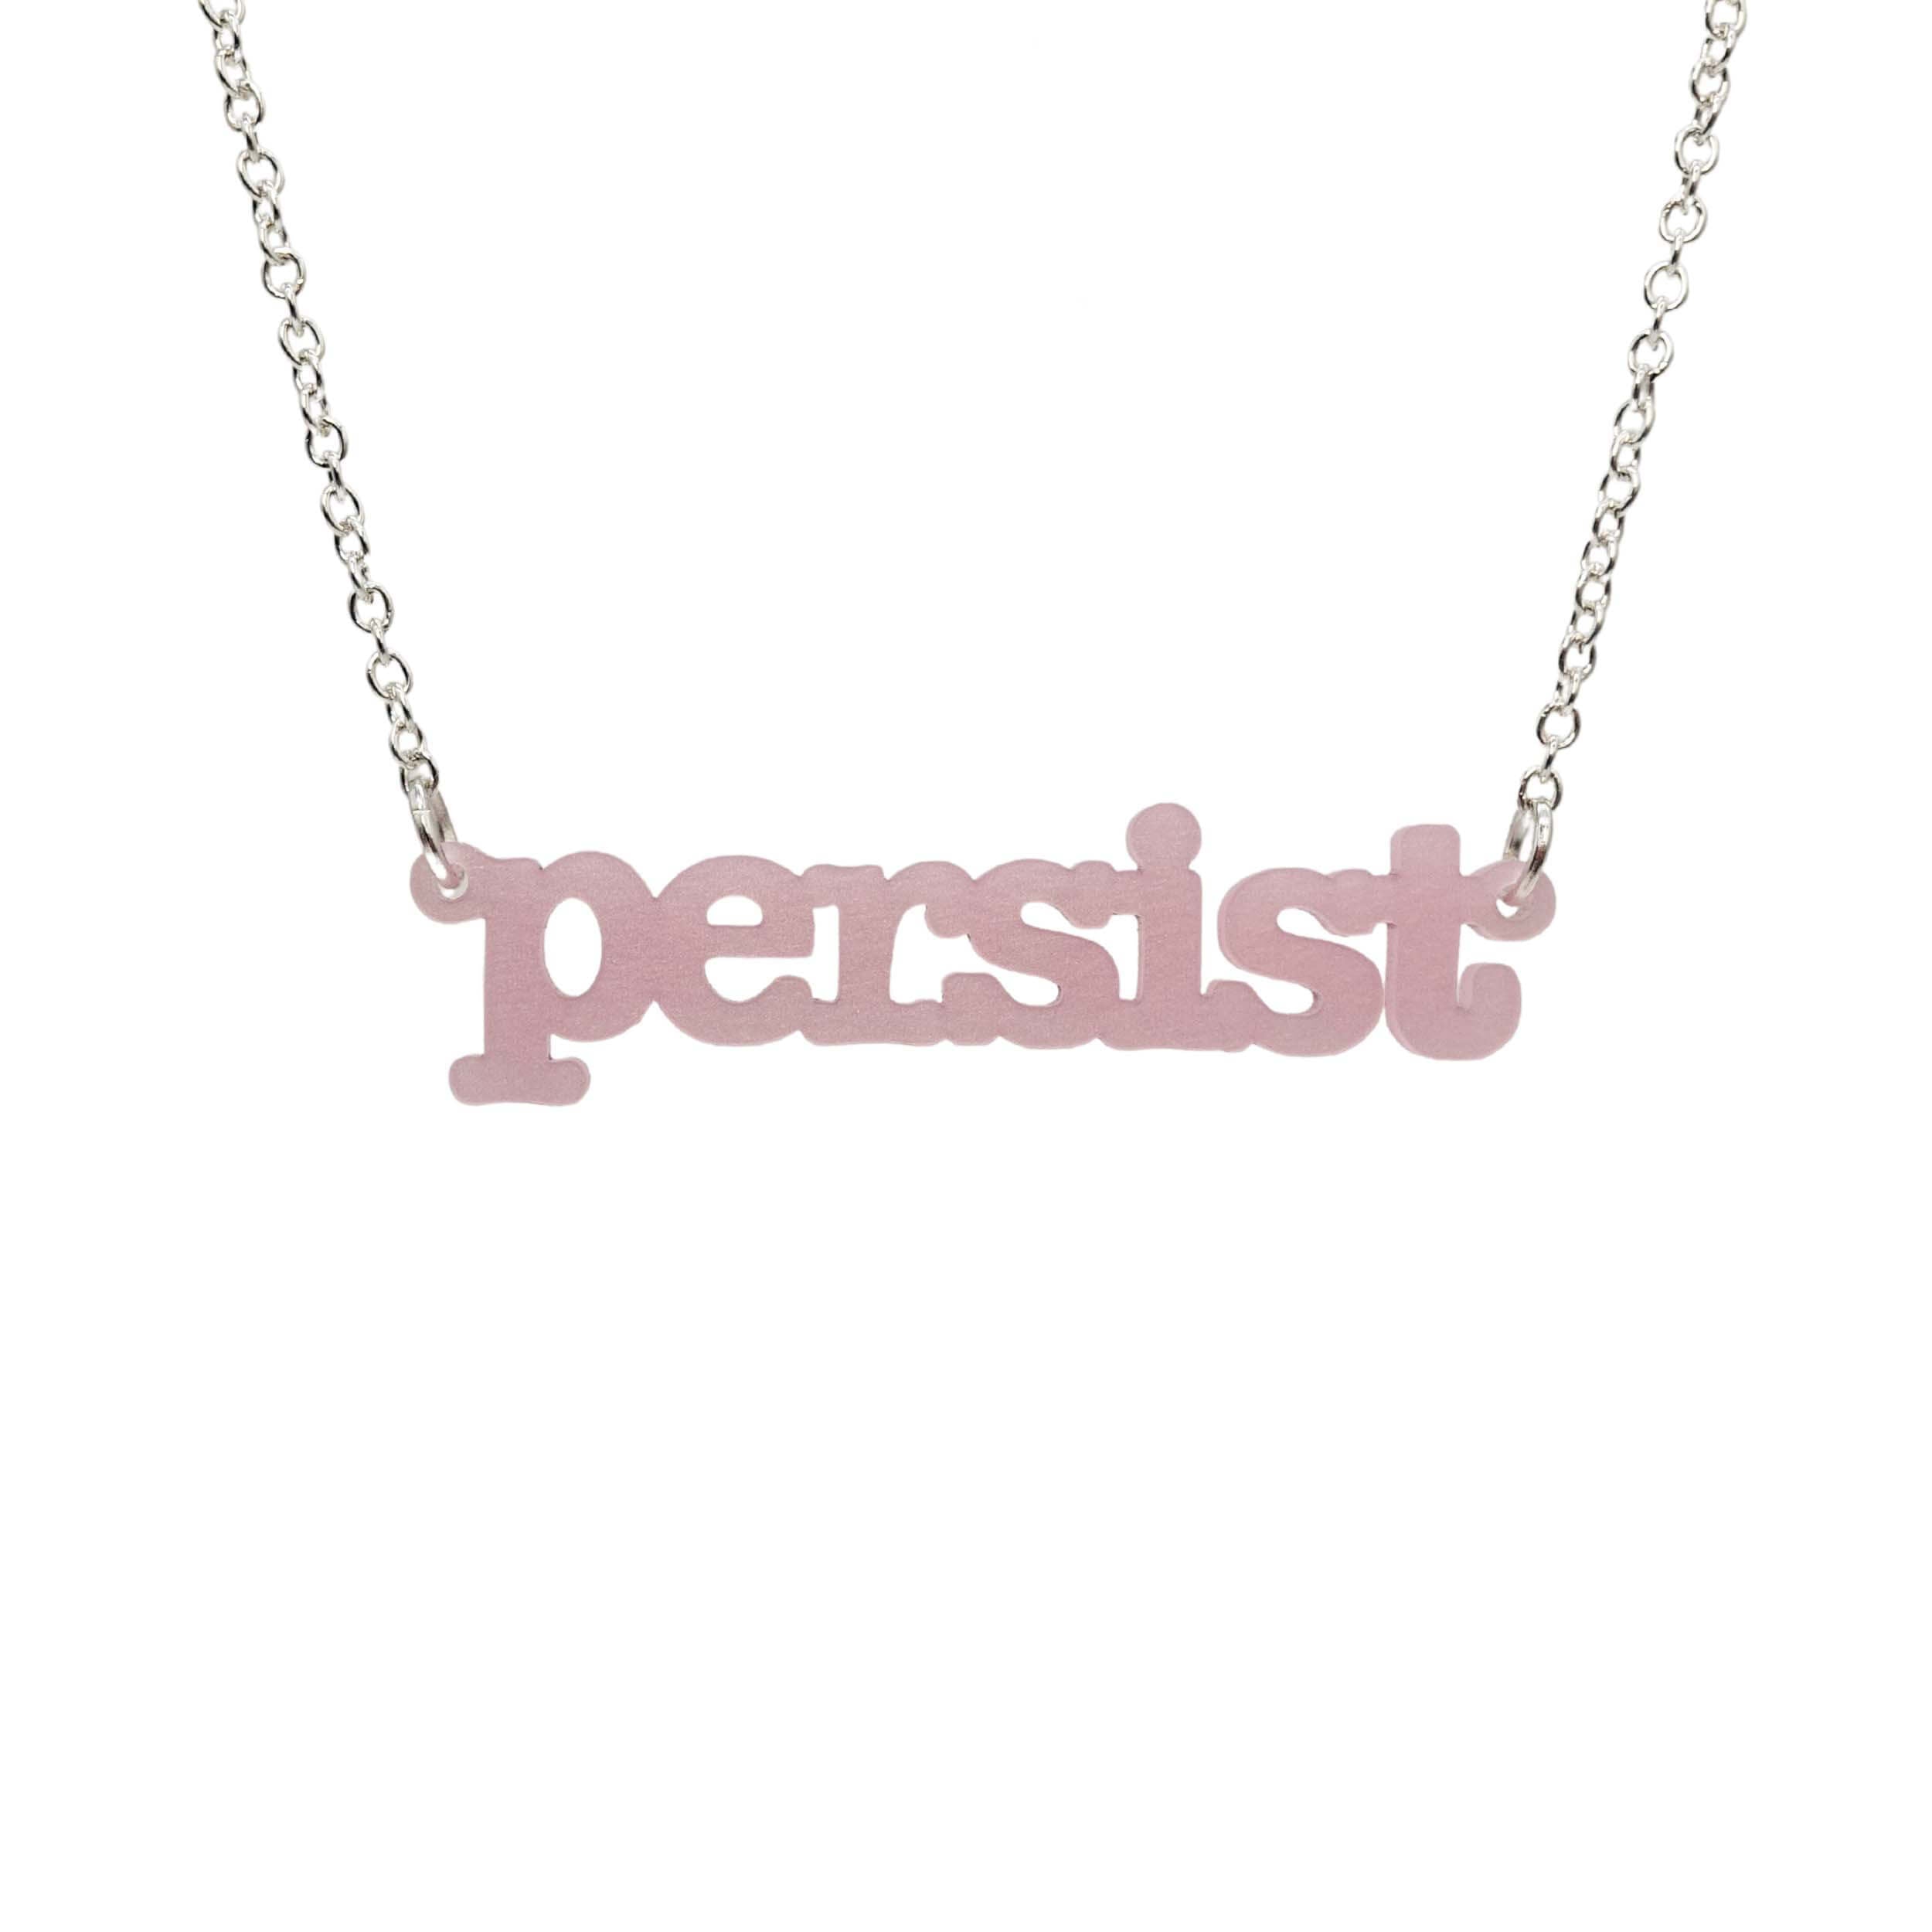 Shell pink Persist necklace in typewriter font hanging on a silver chain against a white background. 